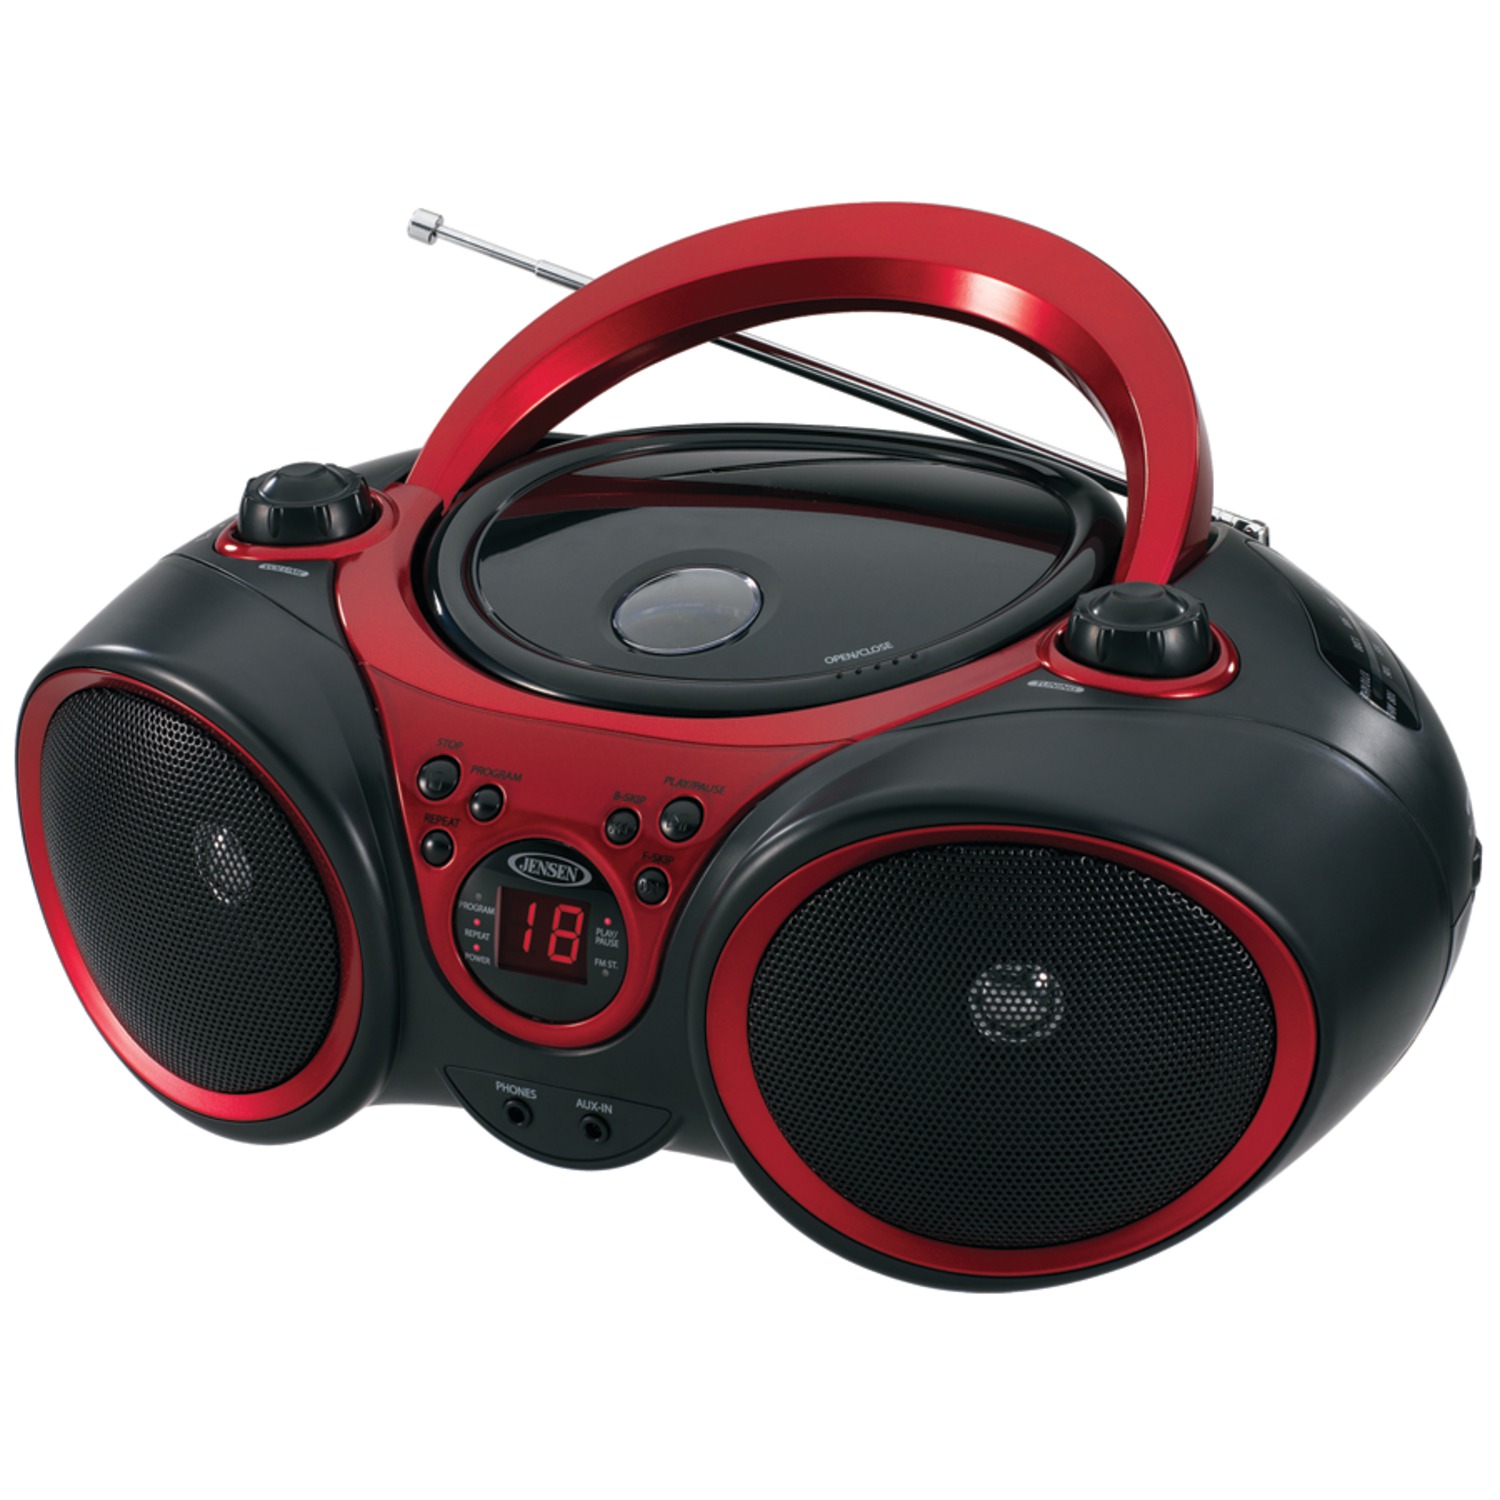 Jensen 3-Watt RMS Portable Stereo CD Player with AM/FM Stereo Radio (Red) - image 2 of 6